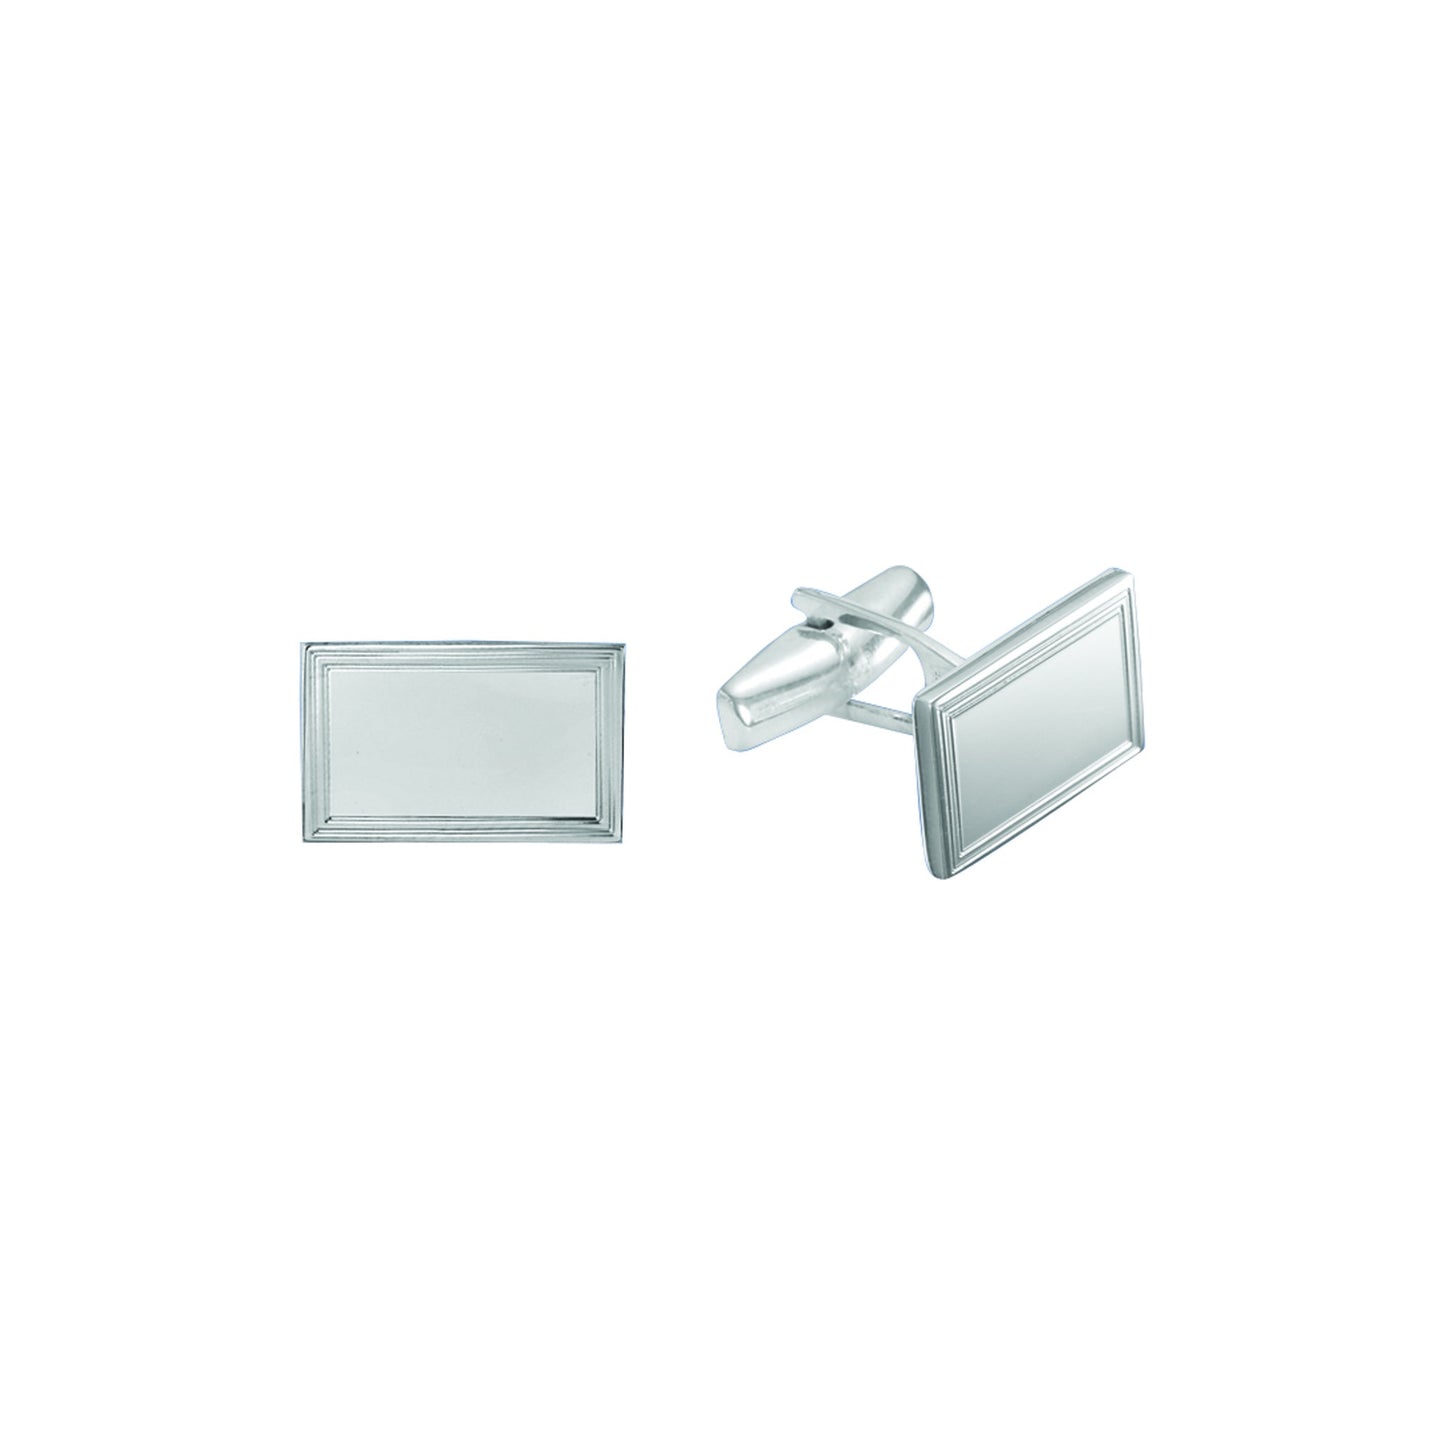 A sterling rectangle cufflinks displayed on a neutral white background.